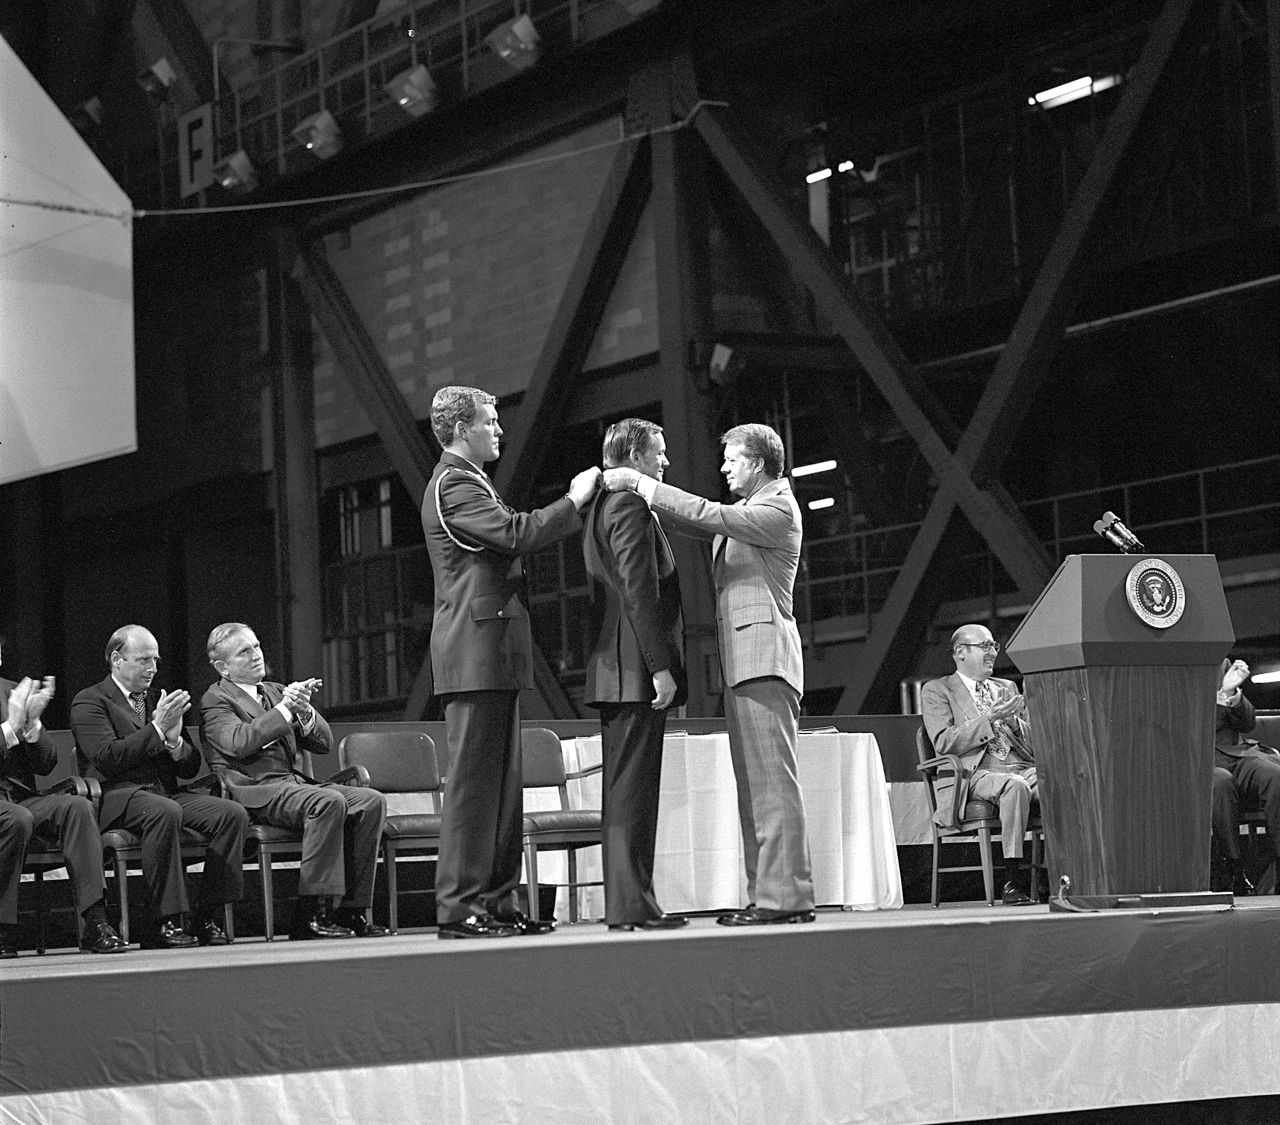 Armstrong receives the first Congressional Space Medal of Honor from President Jimmy Carter, right, assisted by Capt. Robert Peterson, on October 1, 1978. Armstrong, one of six astronauts to be presented the medal during ceremonies held in the Vehicle Assembly Building (VAB), was awarded for his performance during the Gemini 8 mission and the Apollo 11 mission.